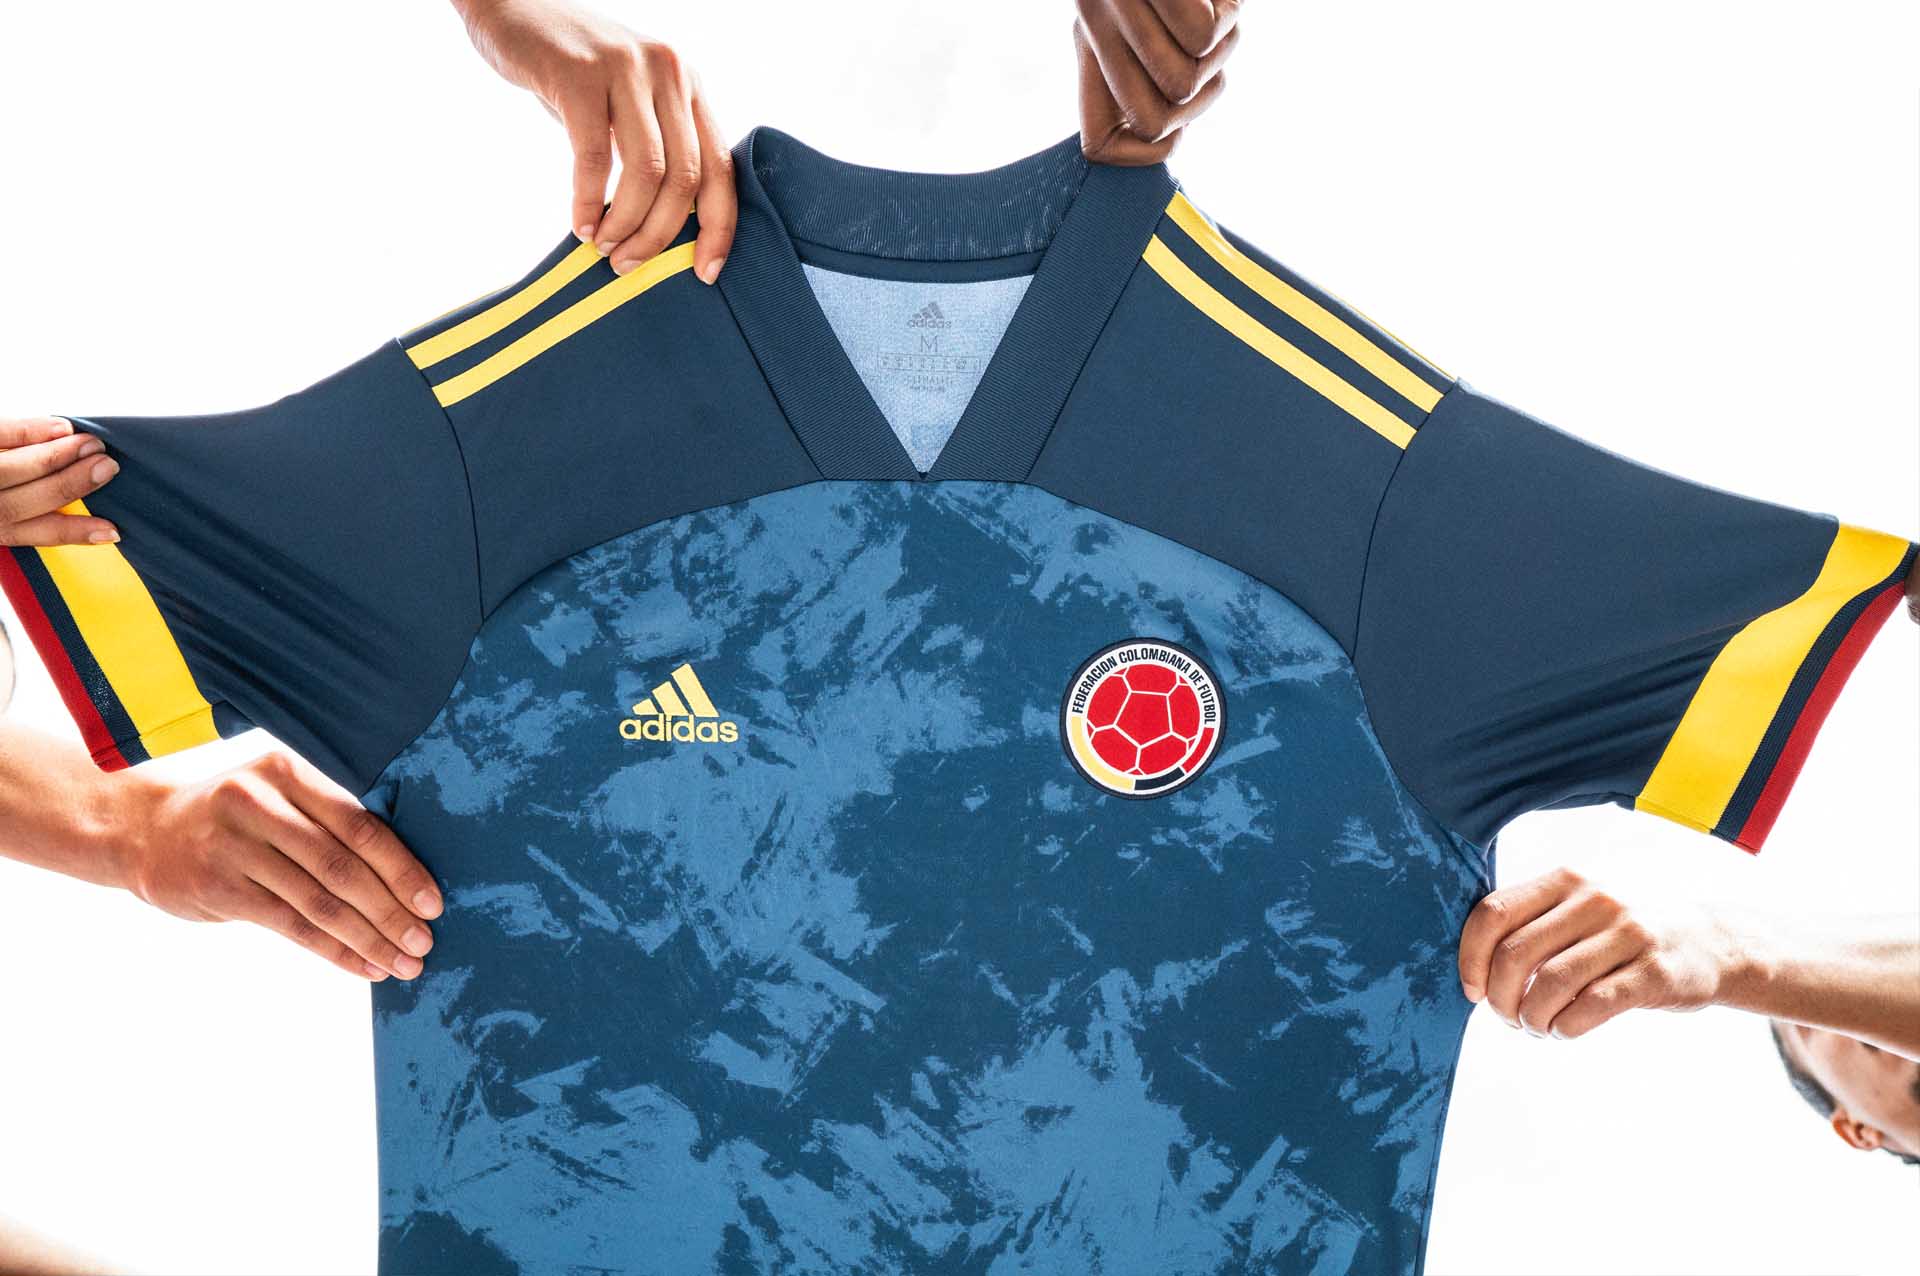 Colombia Copa America 2020 voetbalshirt